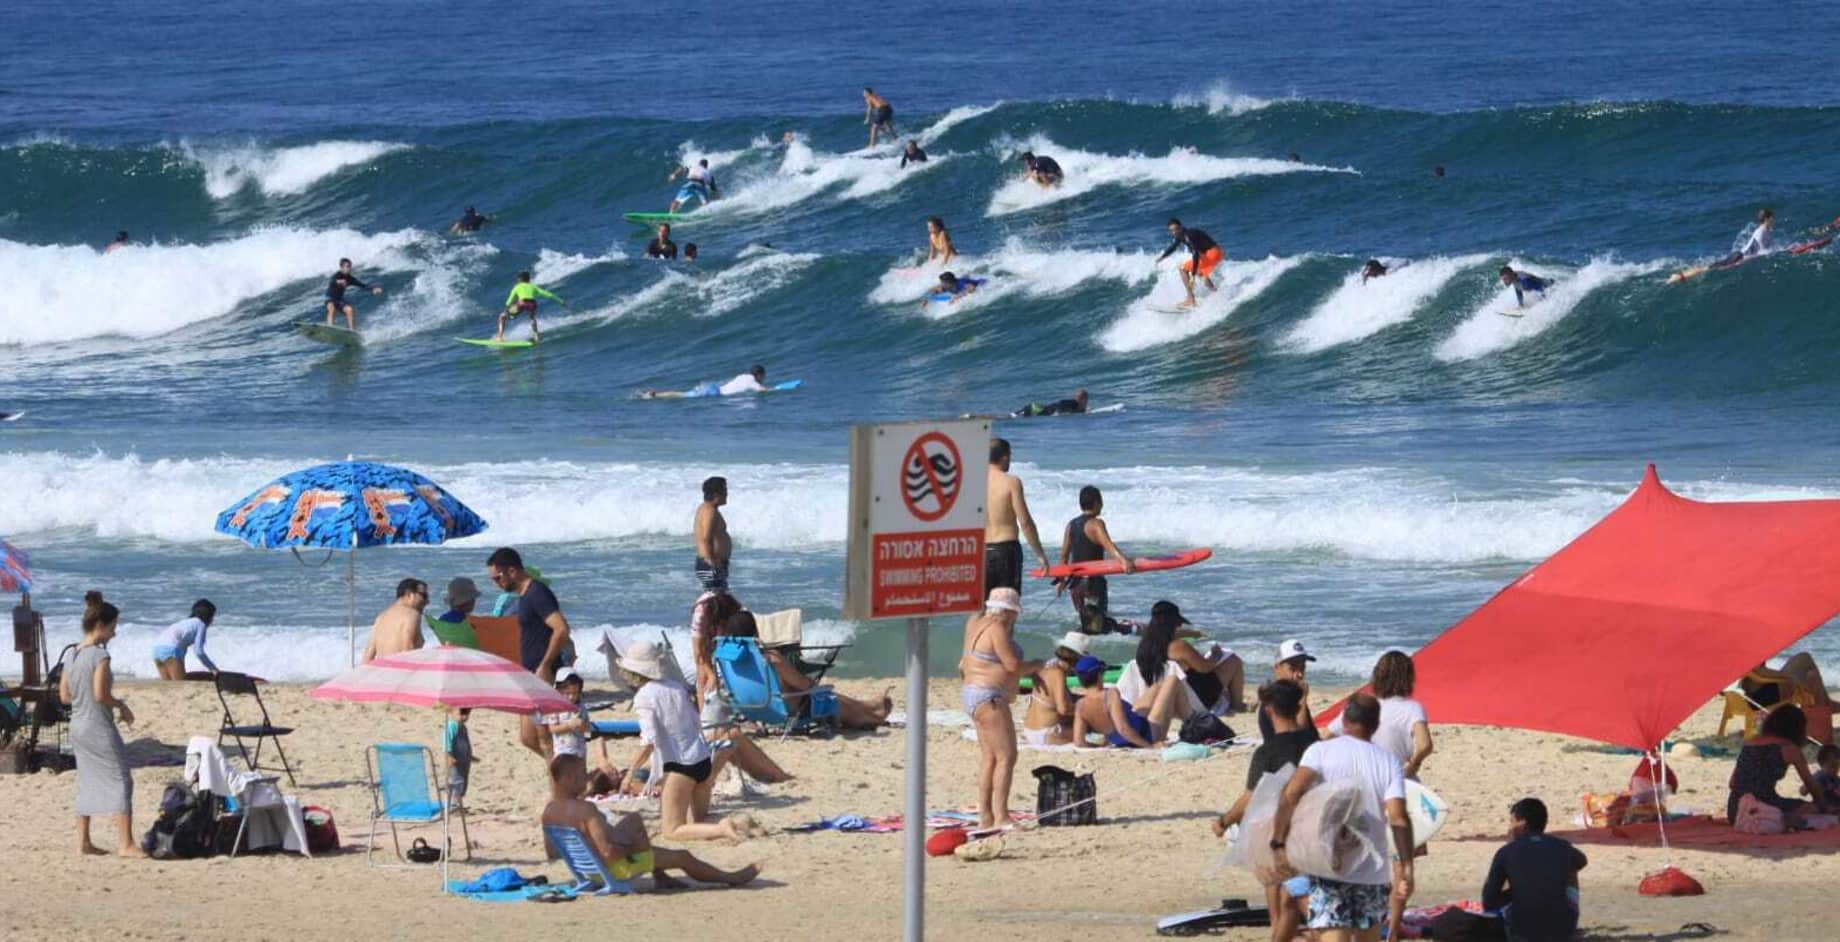 A busy surfing beach in Israel.